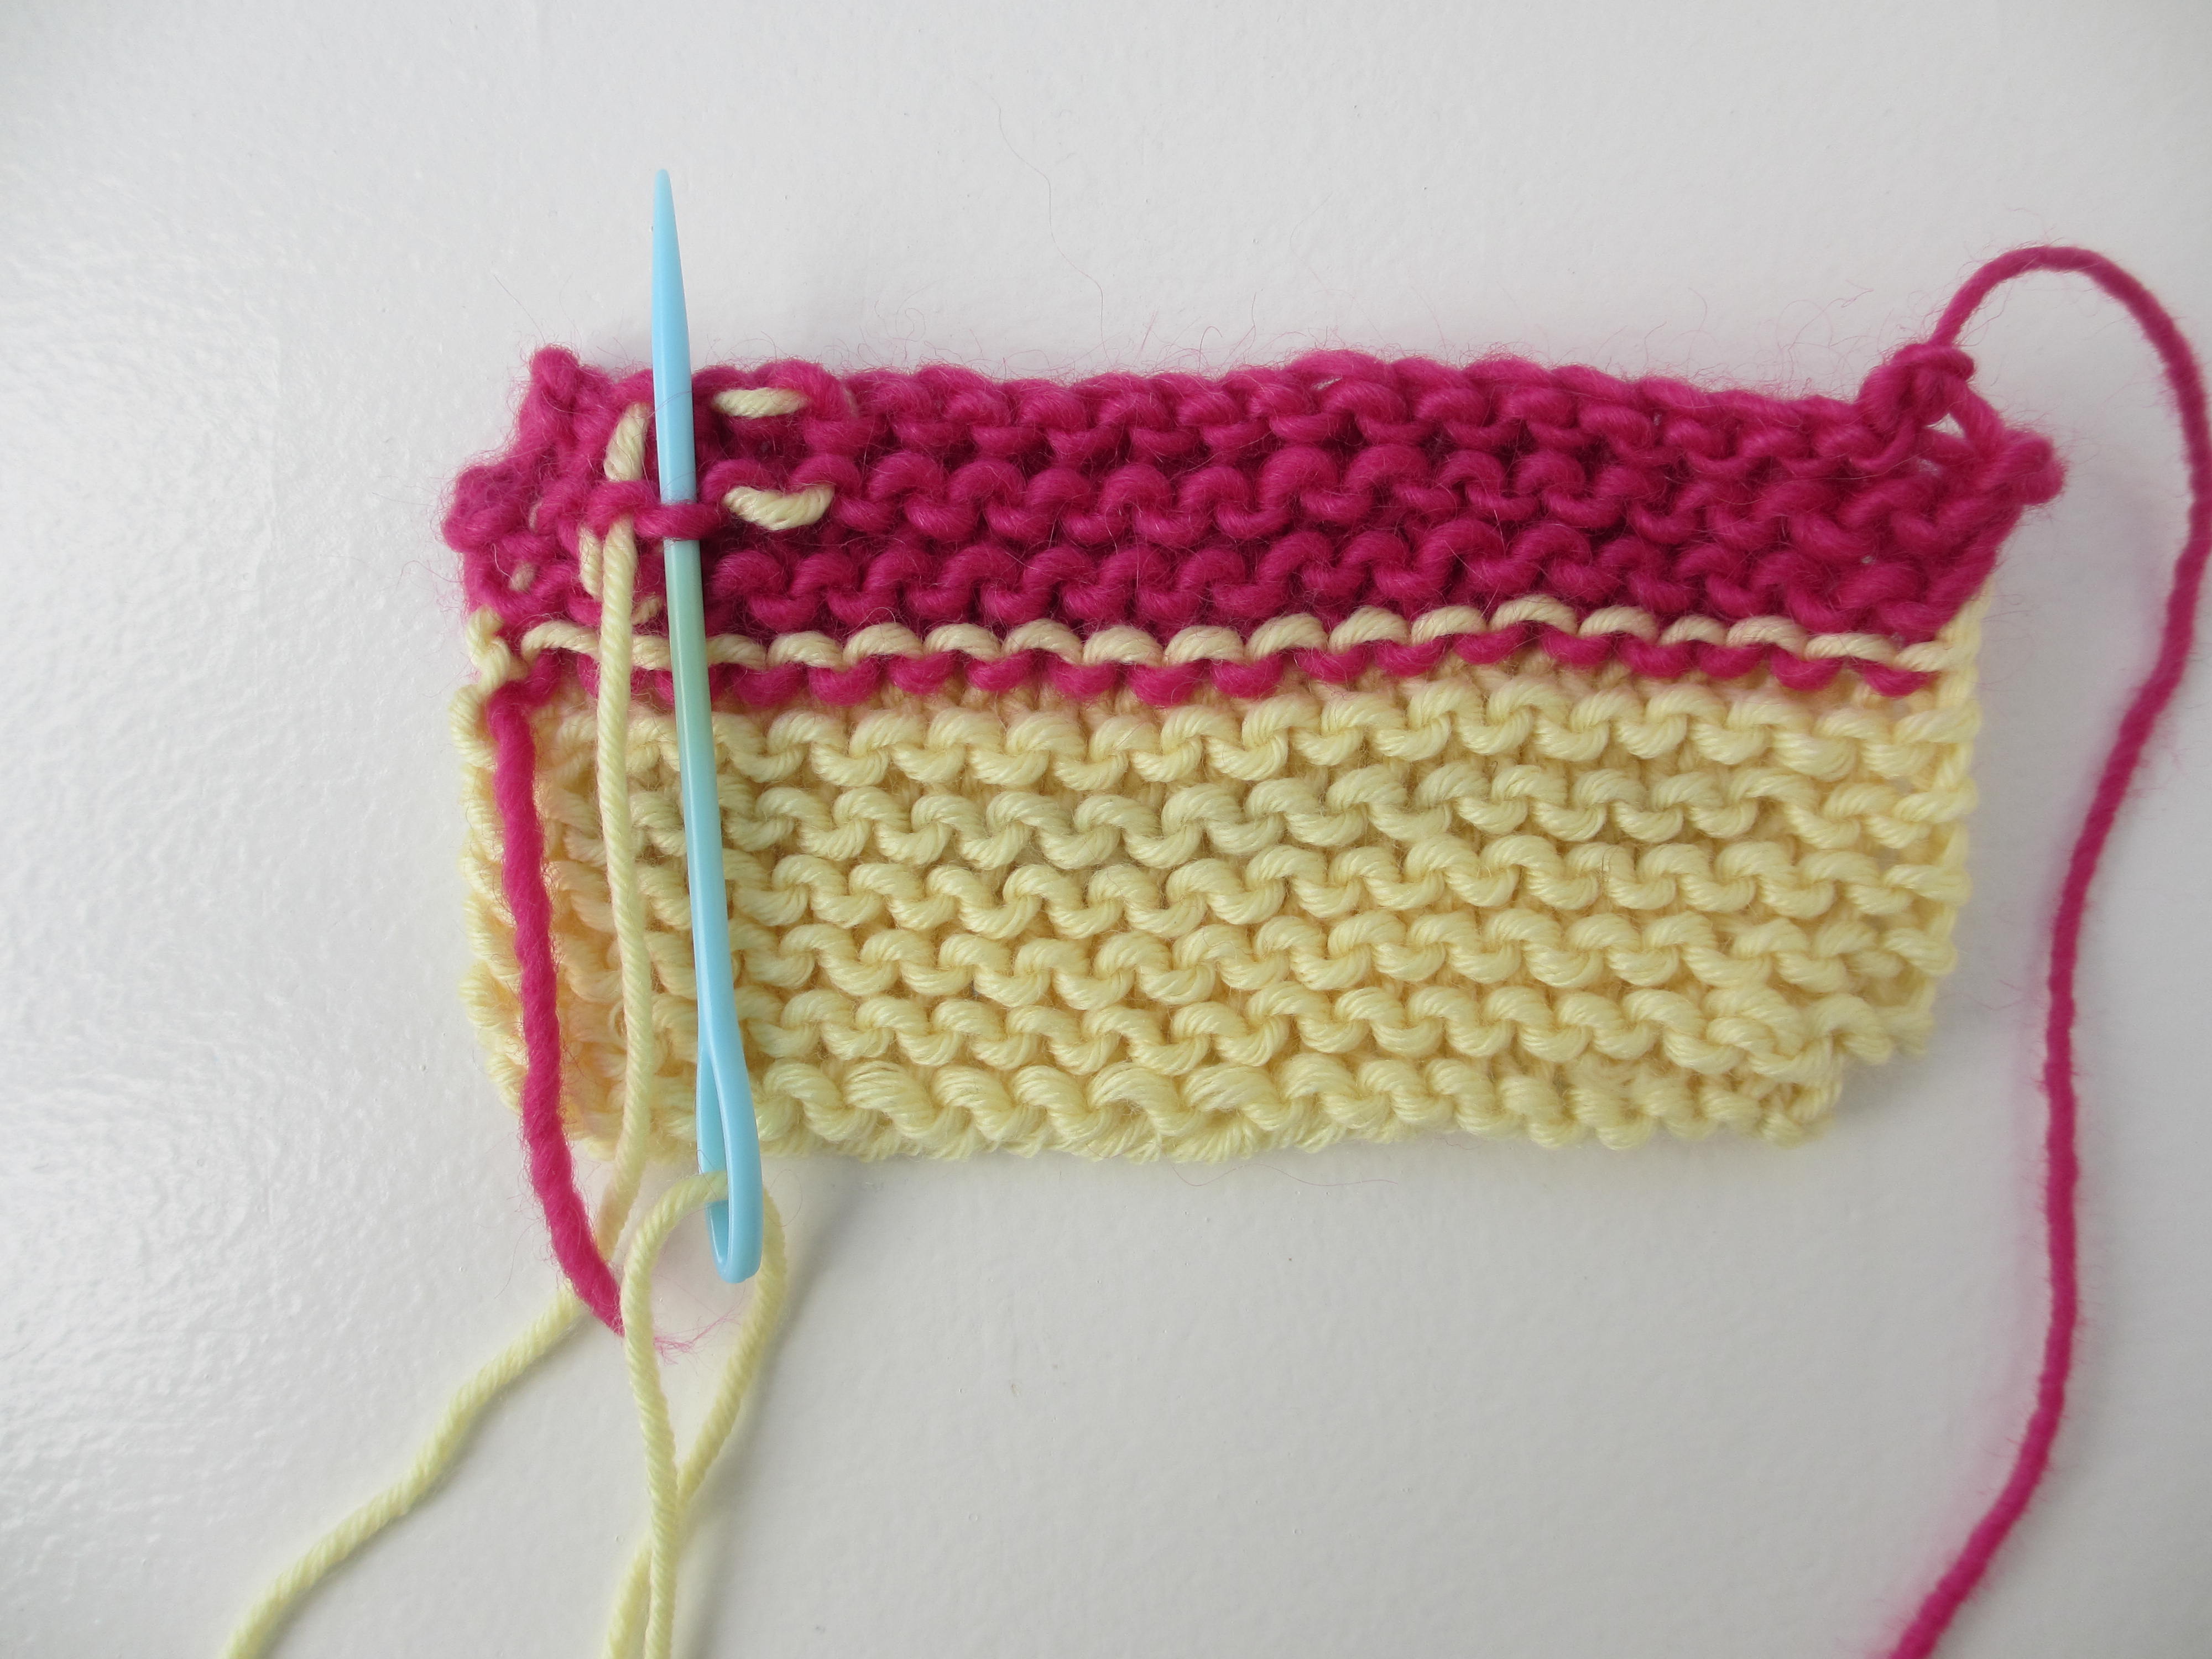 Knitting Project with Embroidery Needle